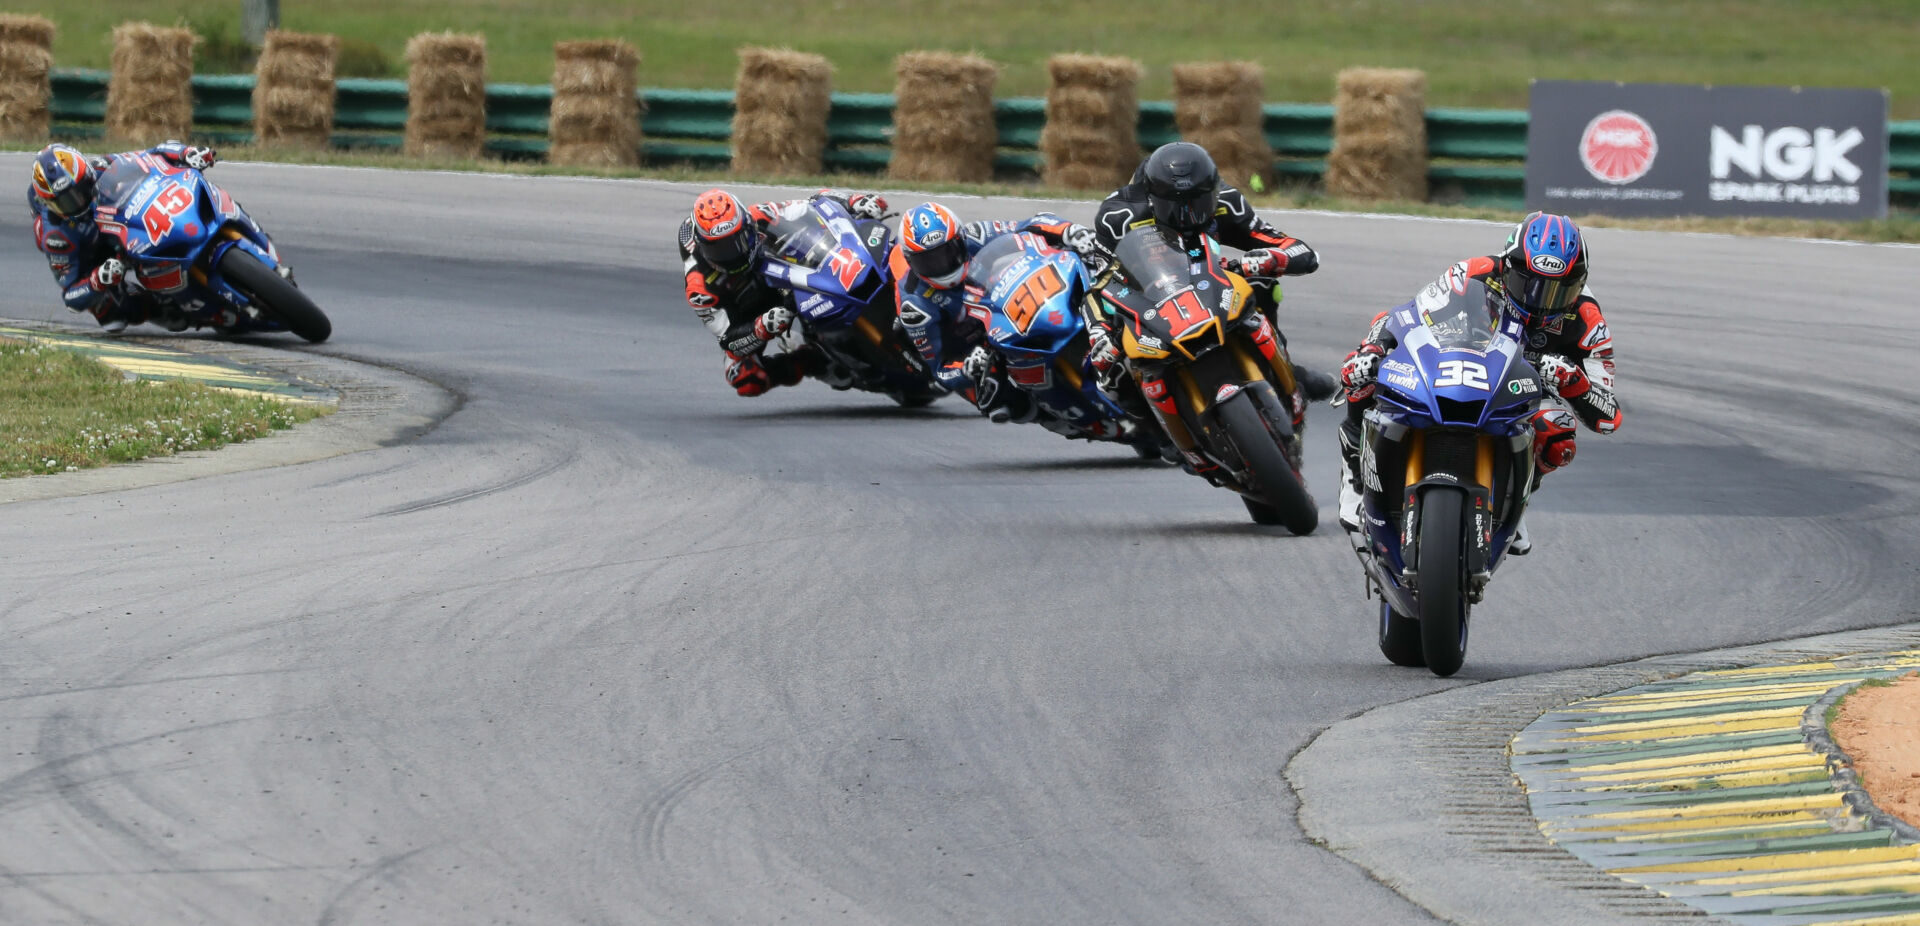 Jake Gagne (32) leads Mathew Scholtz (11), Bobby Fong (50), Josh Herrin (2), and Cameron Petersen (45) during MotoAmerica Superbike Race One at VIR in 2021. Photo by Brian J. Nelson.